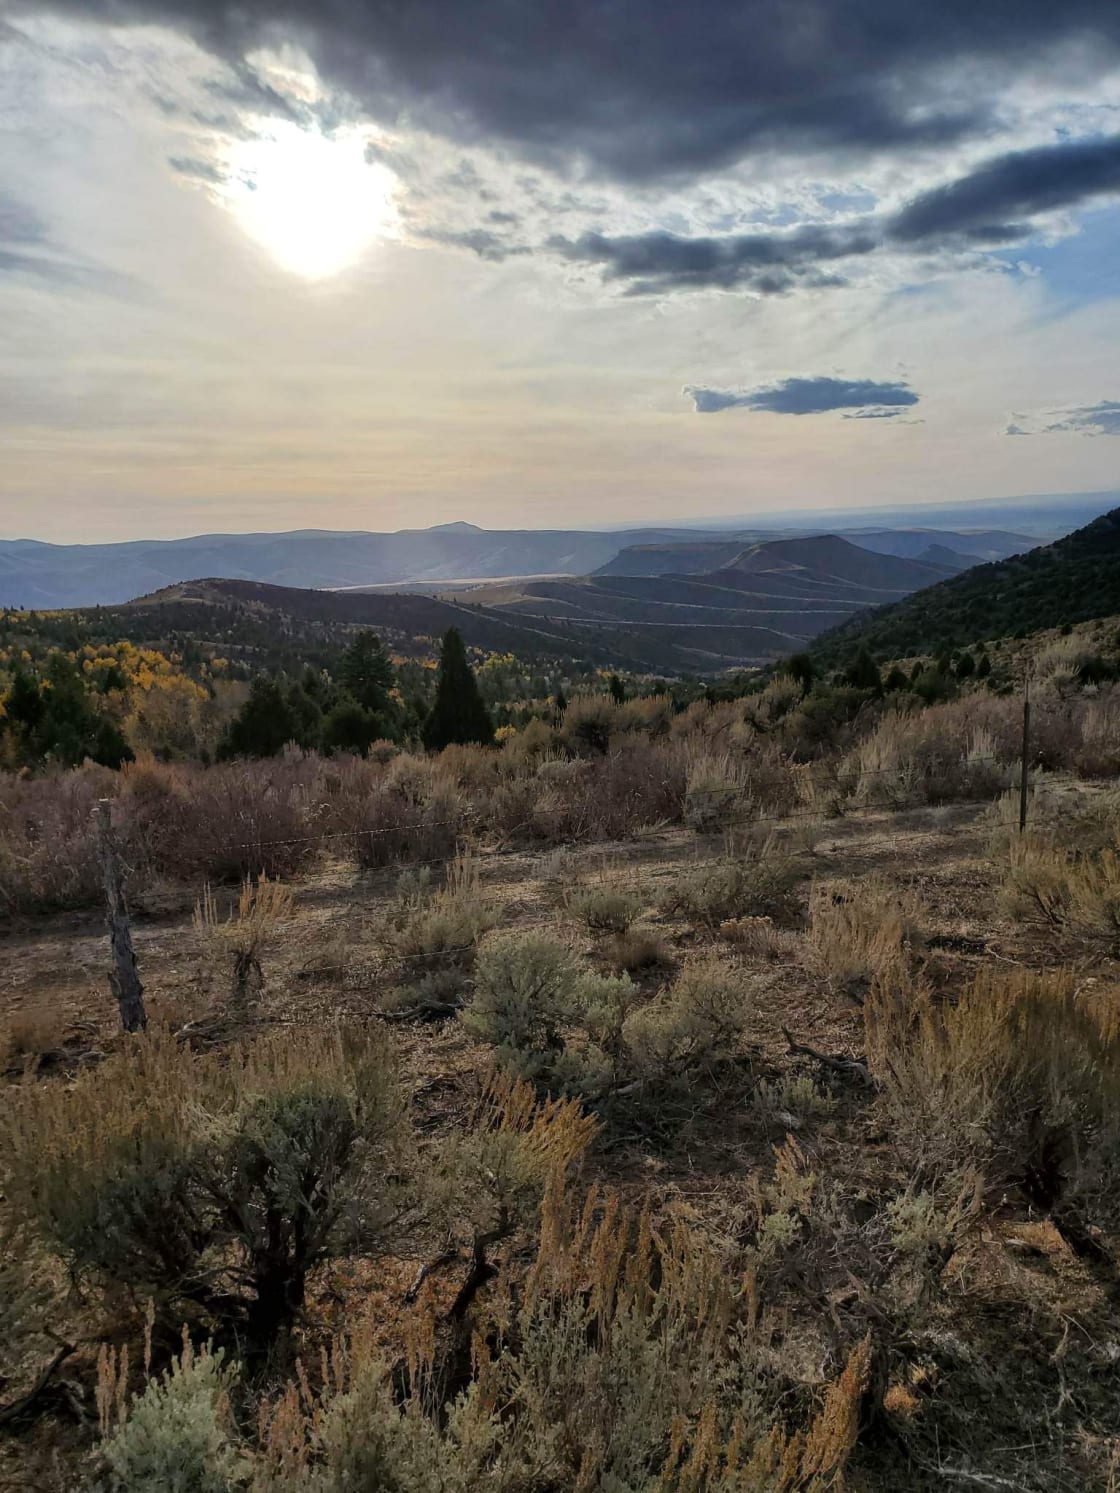 With thousands acres of private land to explore, the views will not disappoint. 